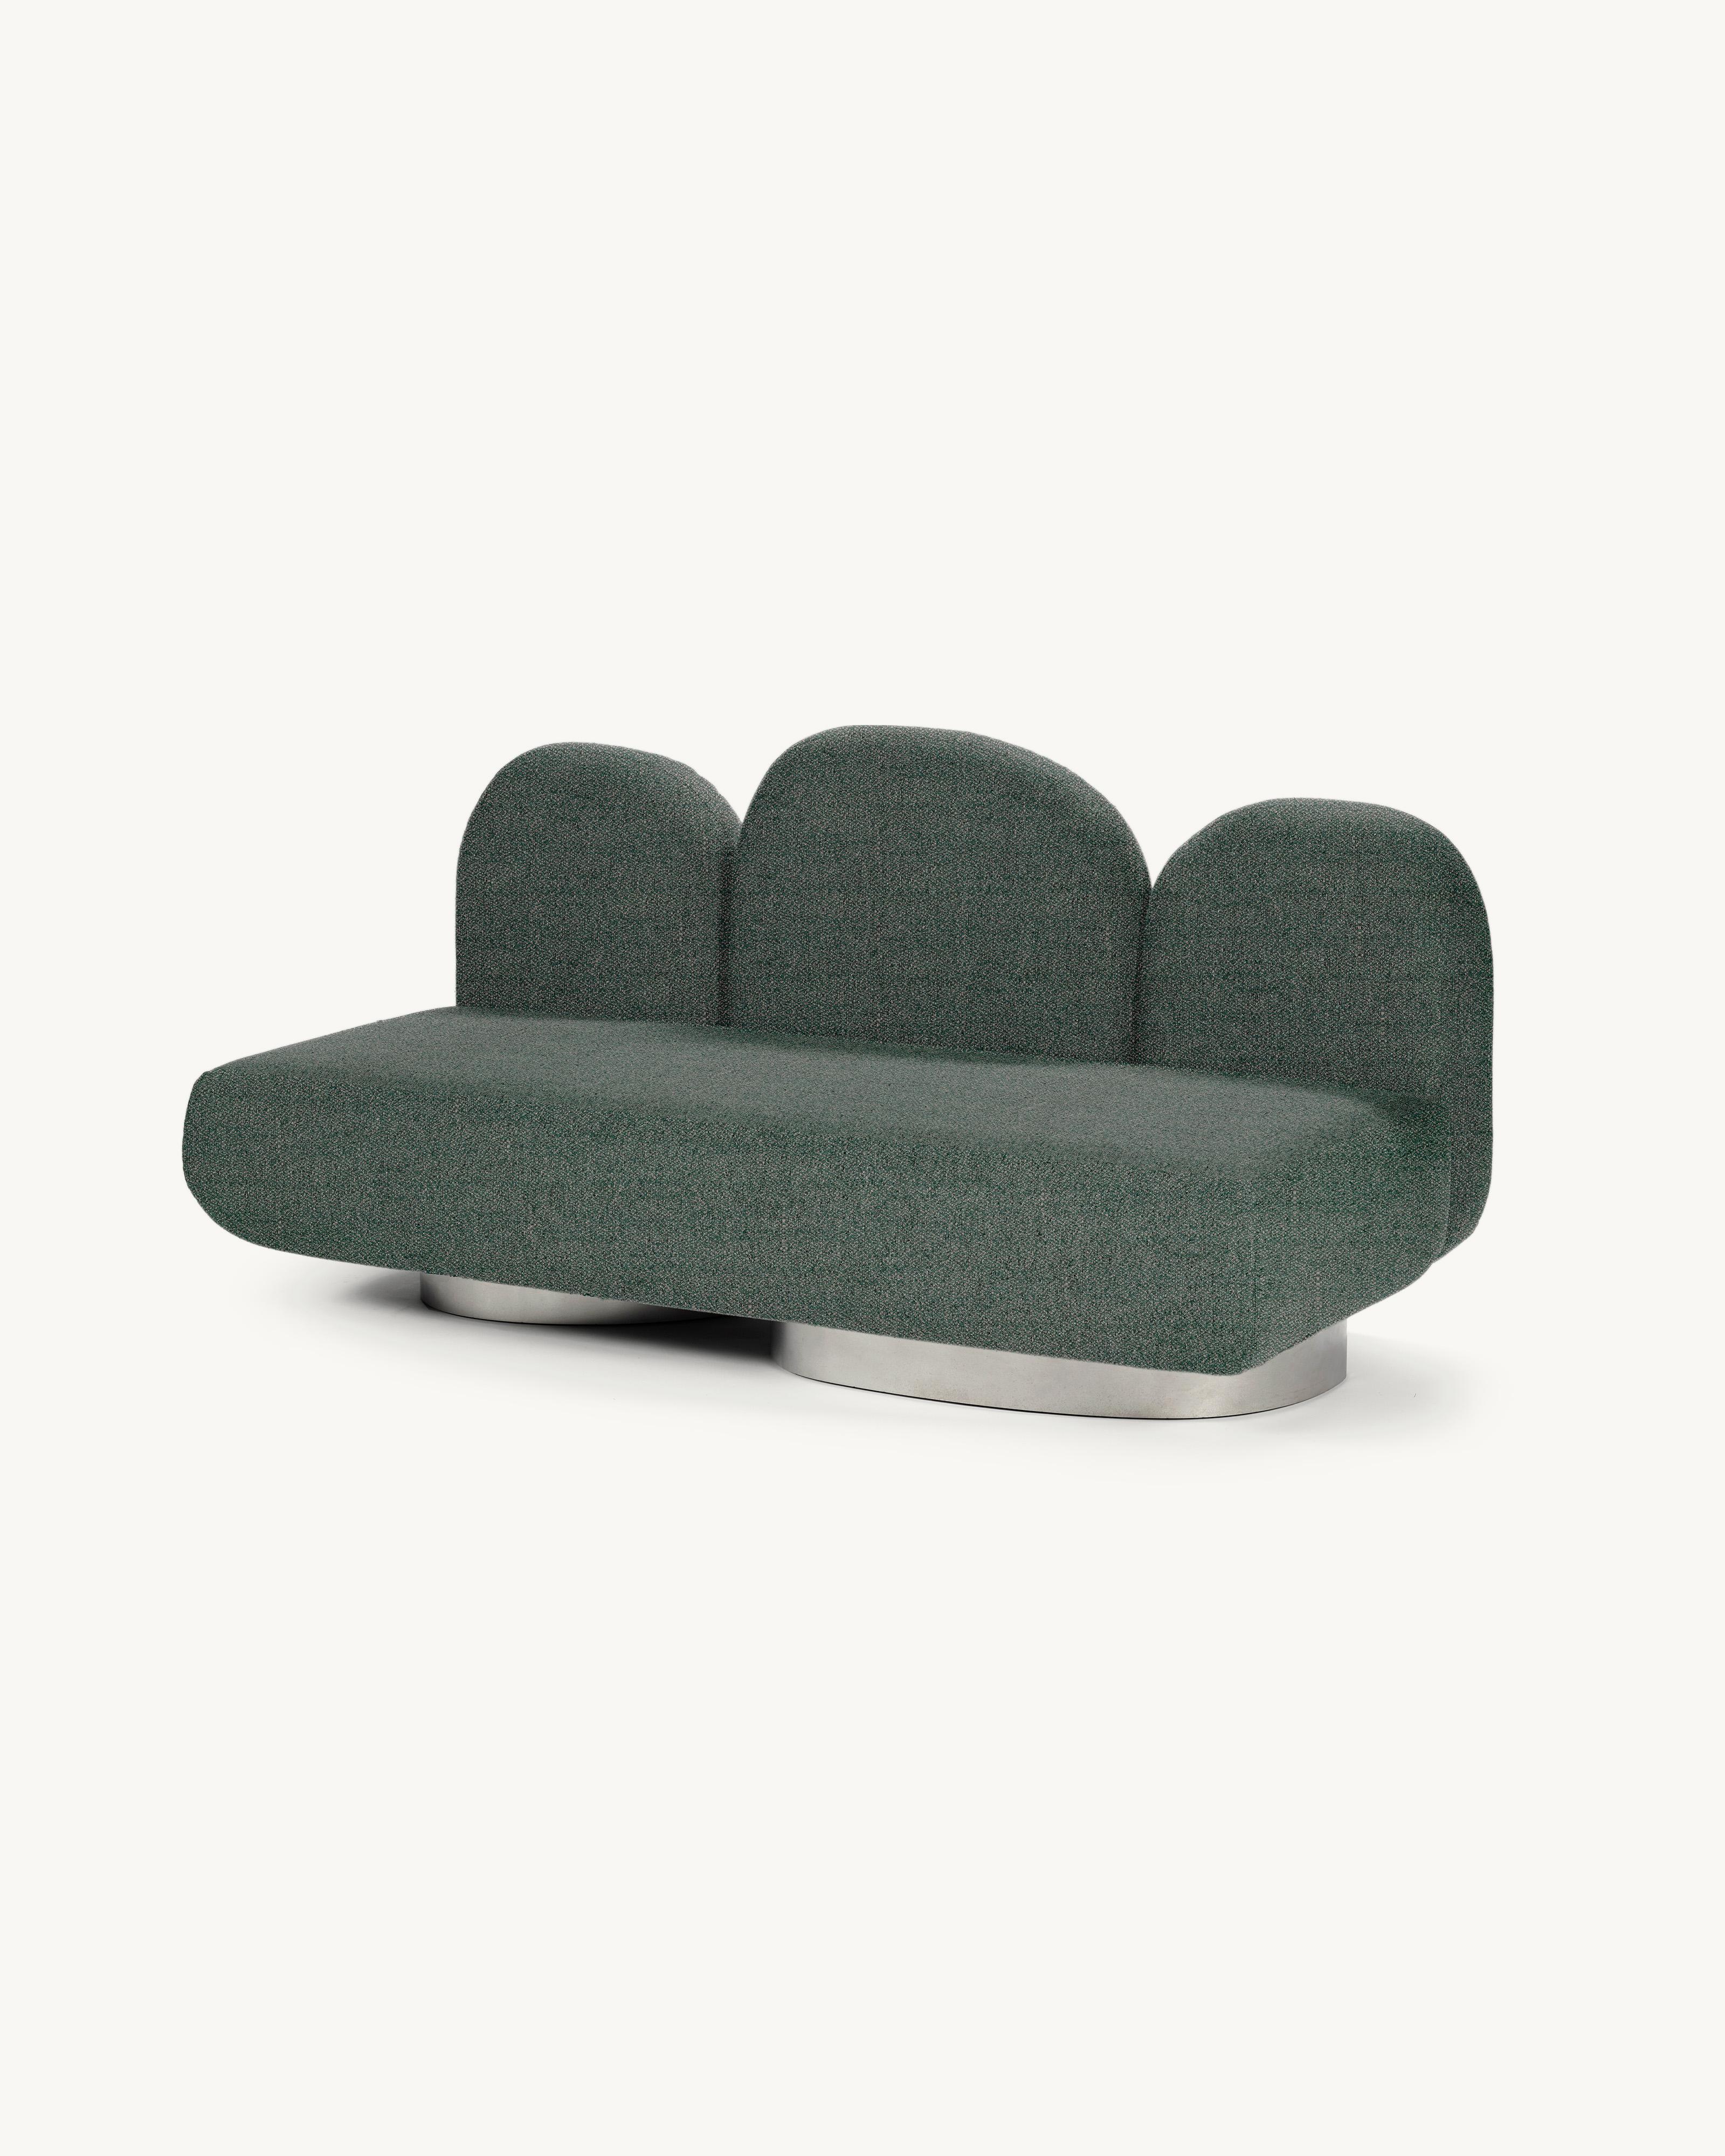 Modular Sofa Assemble, 2 seaters 
Designed by Destroyers/Builders x Valerie Objects
Upholstery: Gijon Green 

Code: V9020406

Dimensions: L 87 W 174 H 85CM (SH 40 cm)
Materials: Wood, aluminium and upholstery

The ASSEMBLE sofa encourages exactly